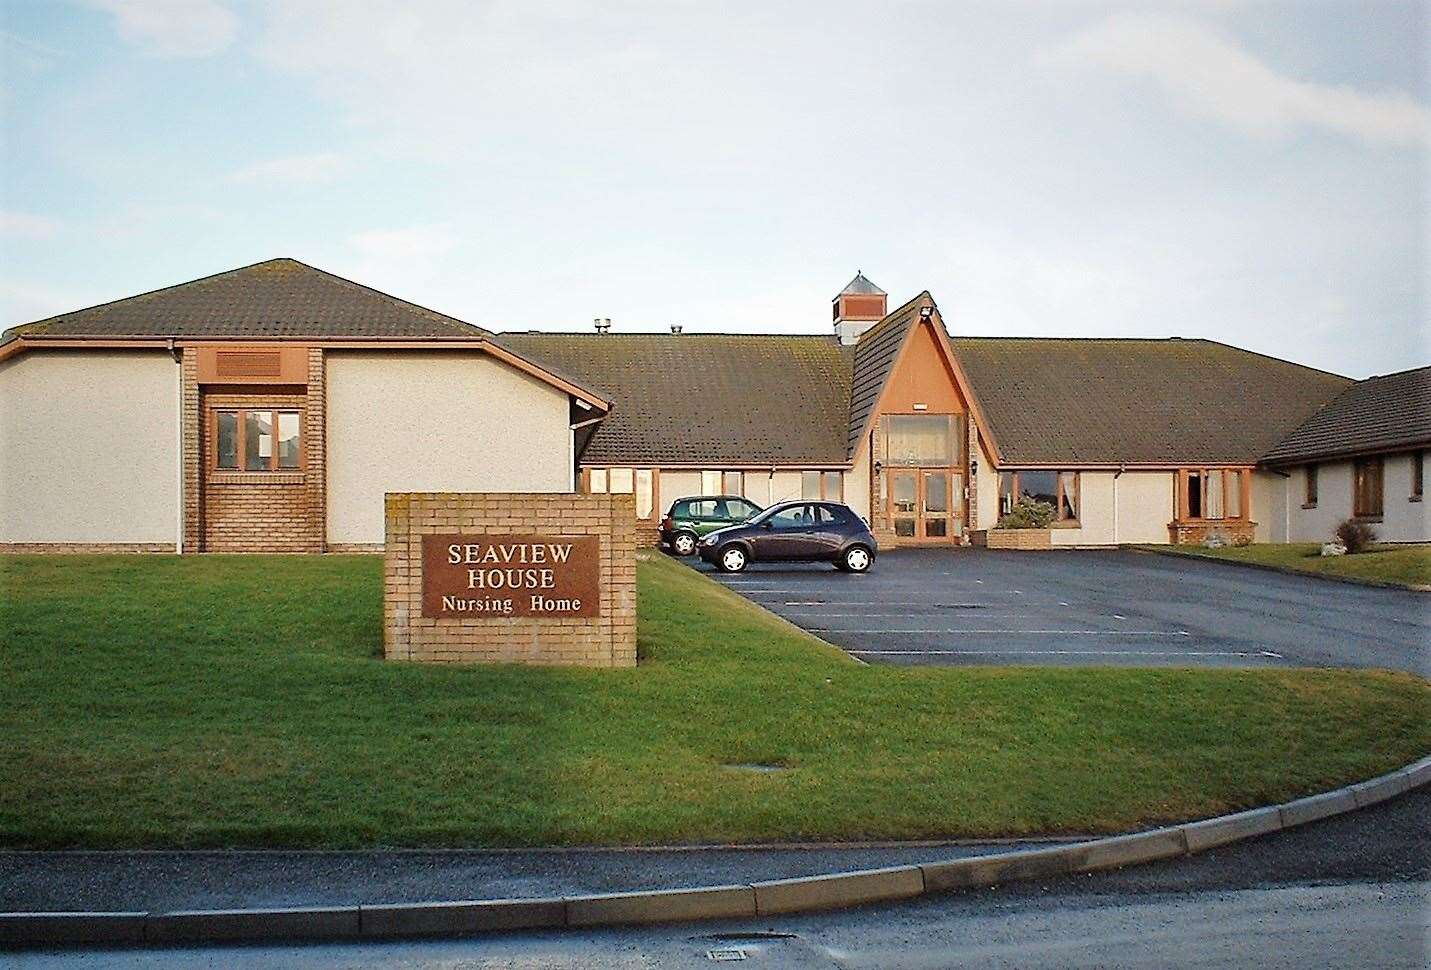 Seaview House in Wick is operated by Barchester Healthcare, one of the largest care providers in the UK.